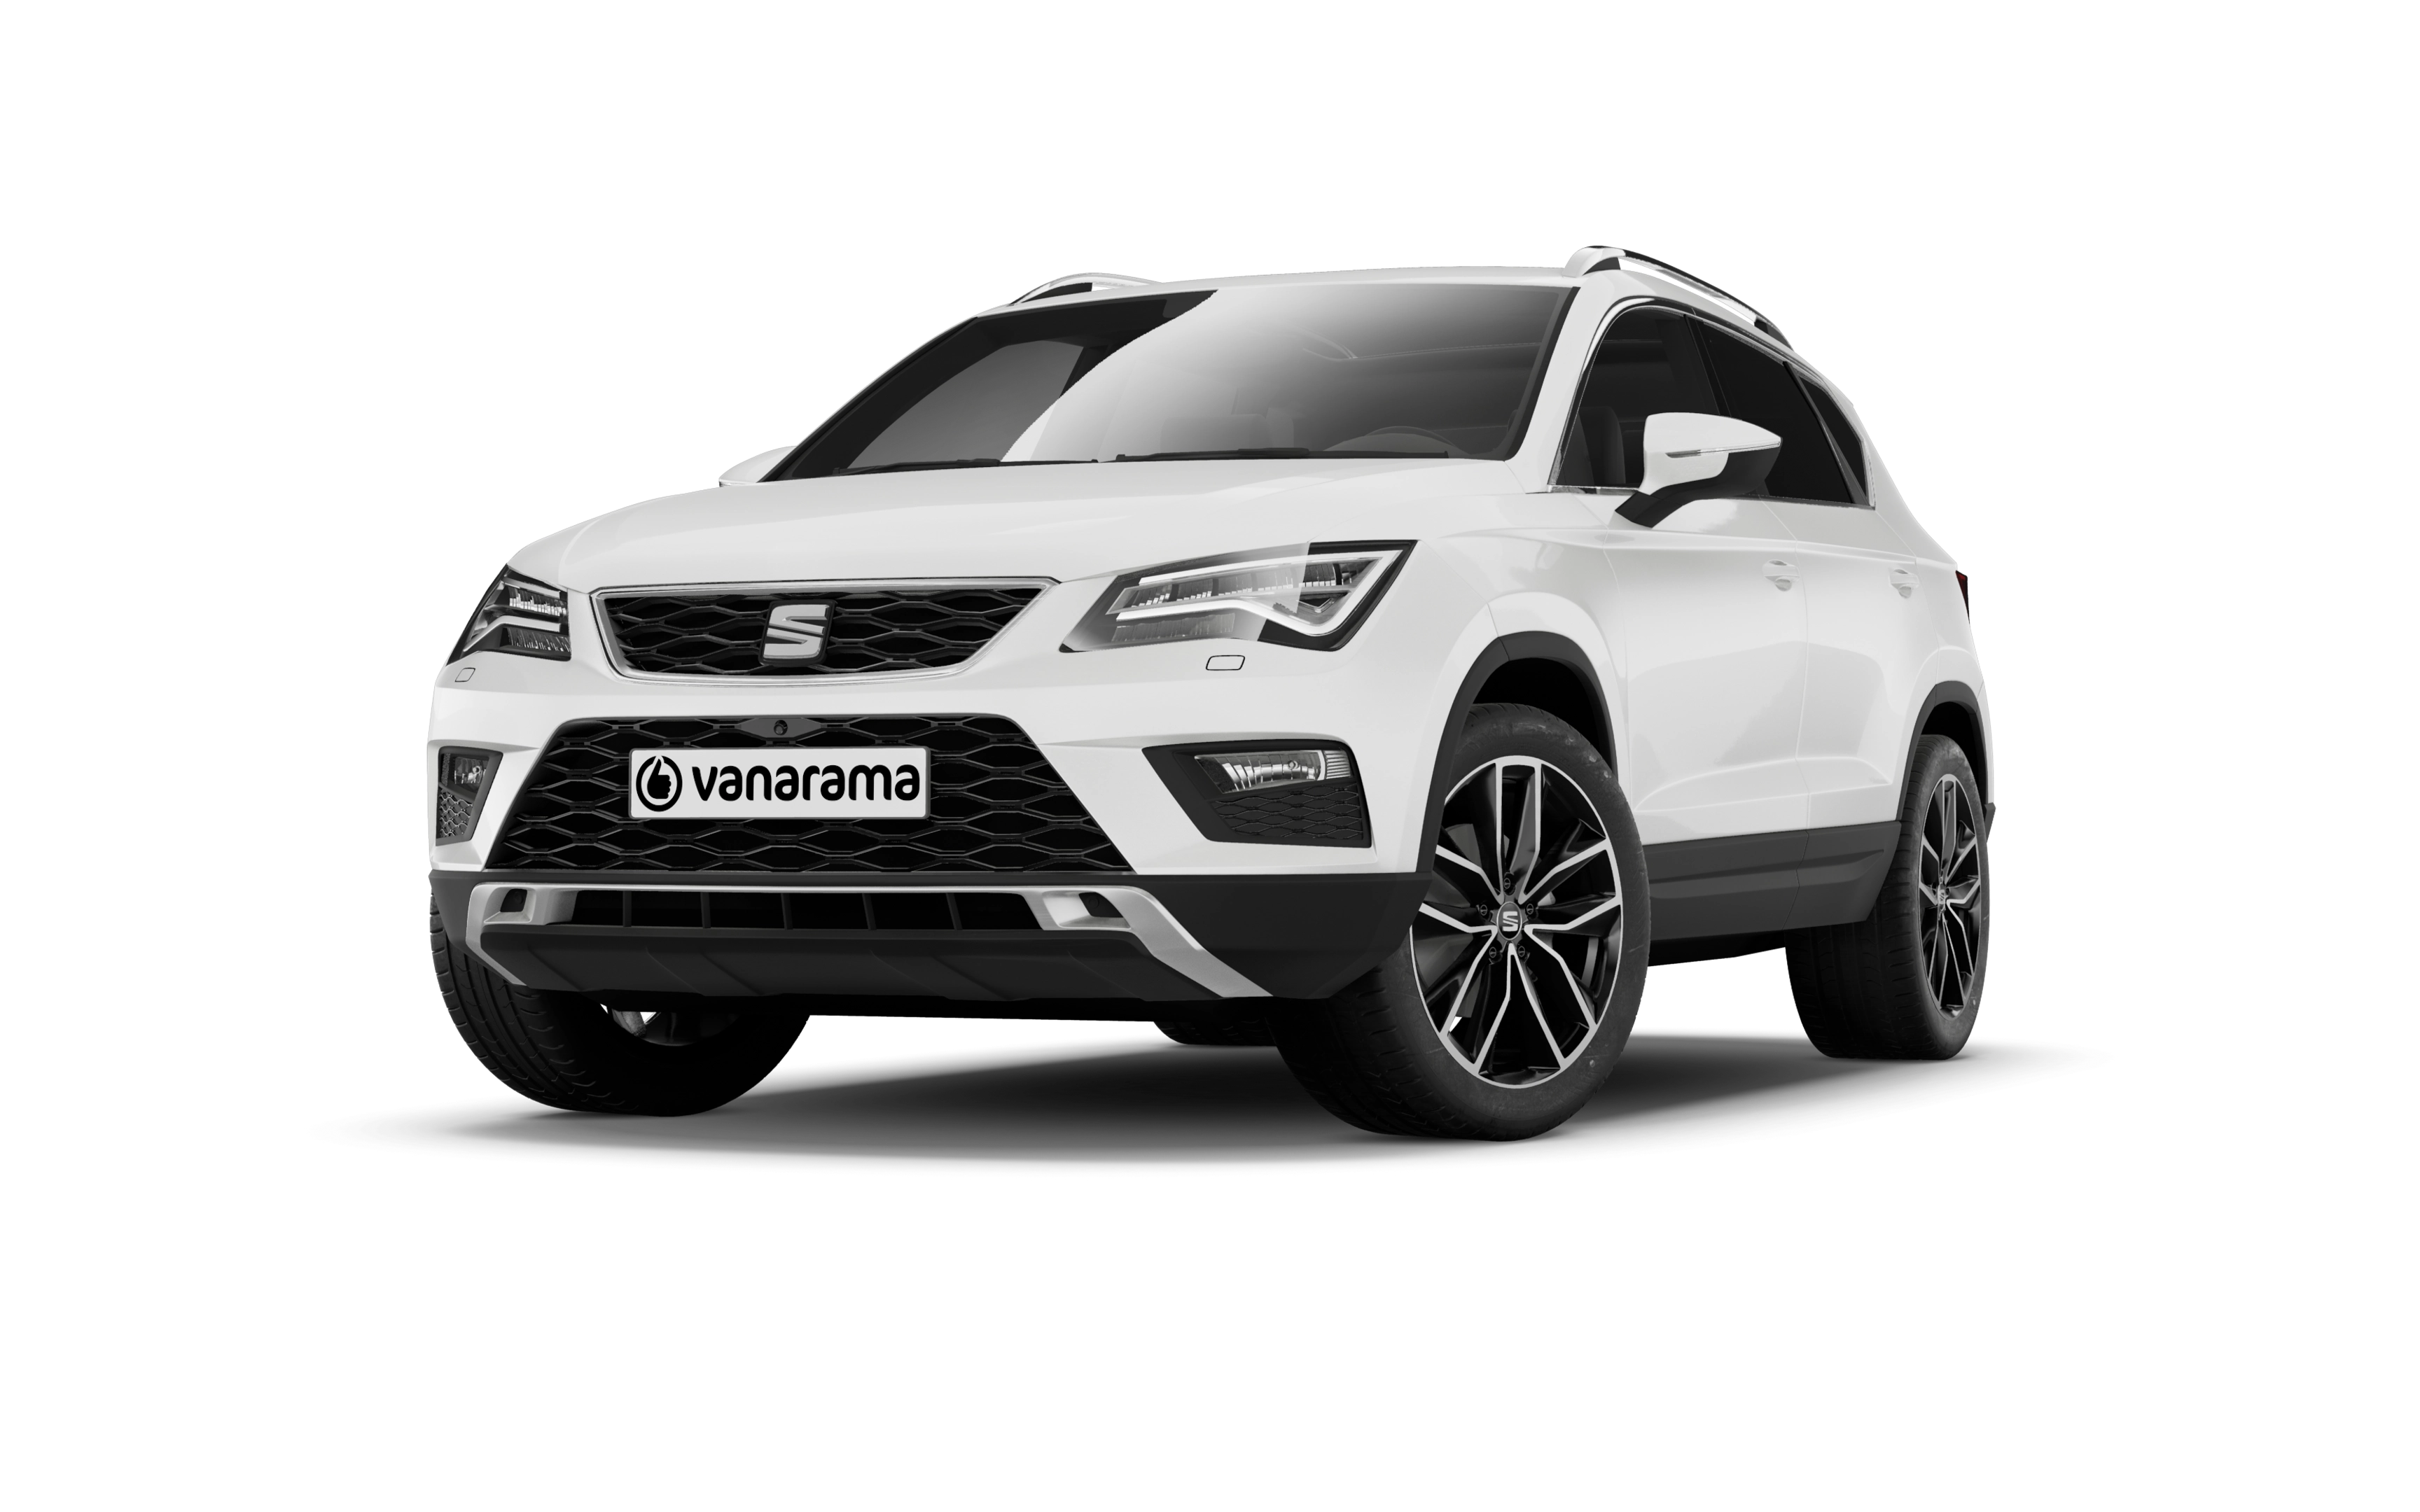 SEAT Ateca new on Euromóvil Talavera, official SEAT dealership: offers,  promotions, and car configurator.